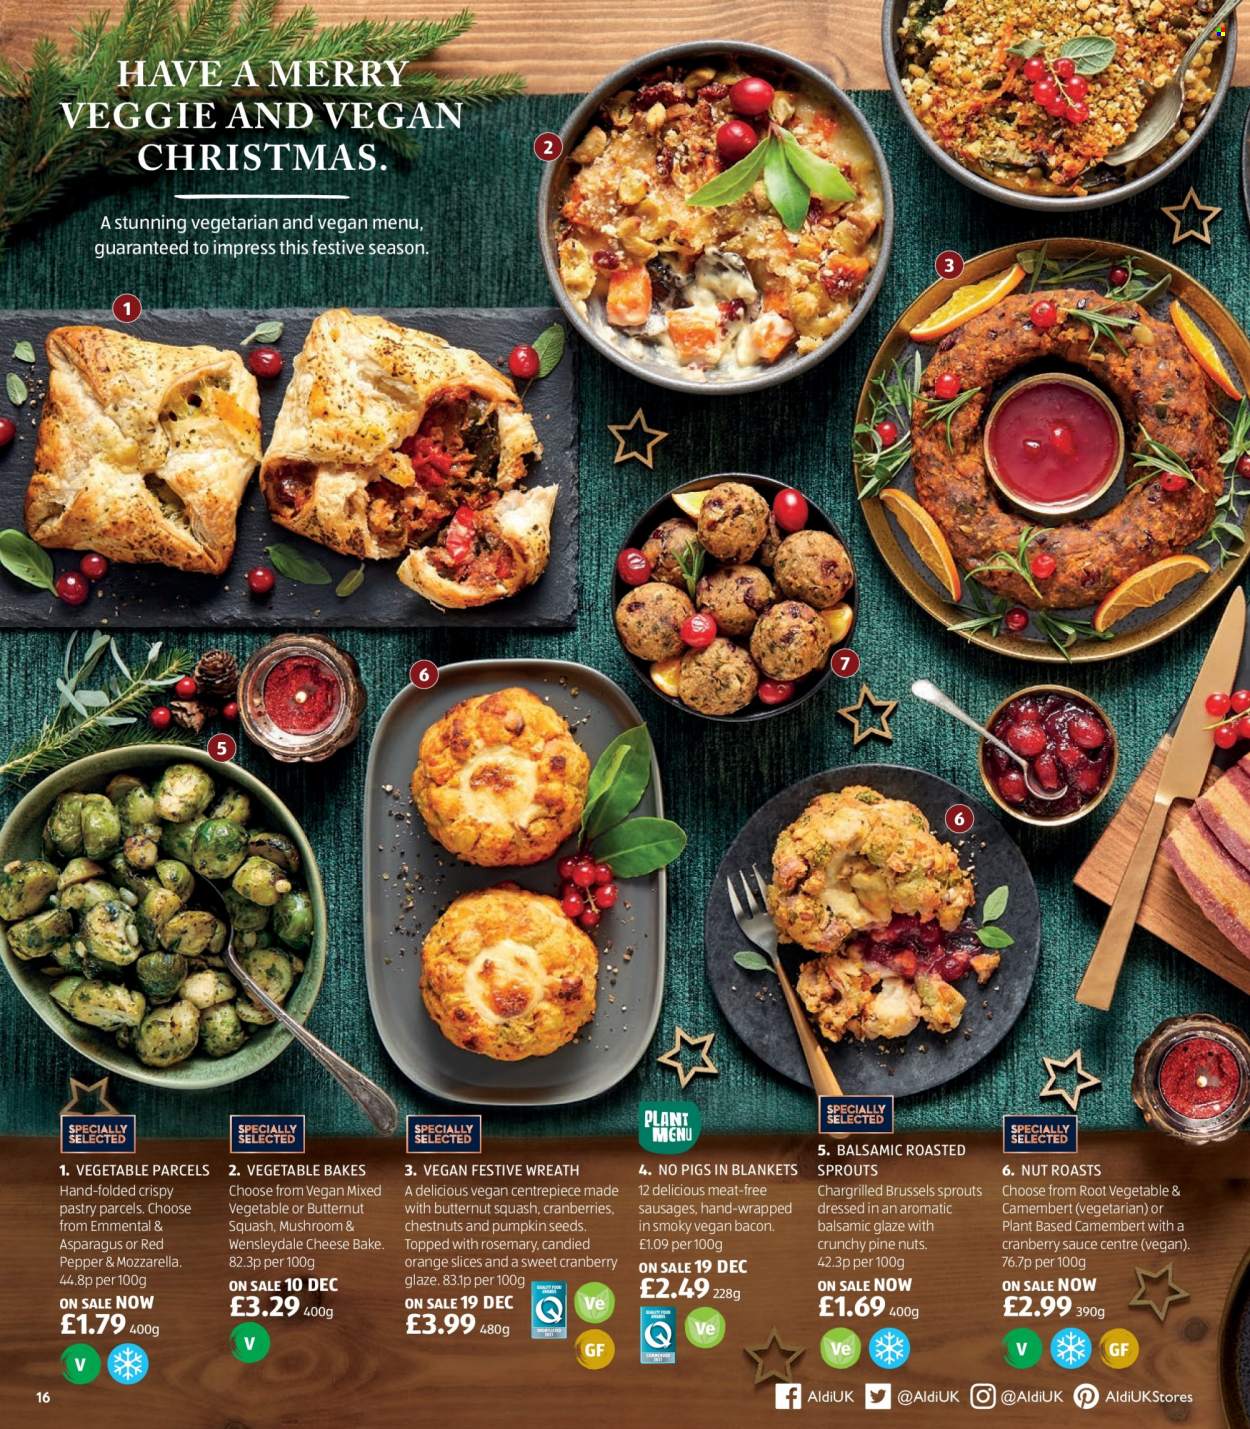 thumbnail - Aldi offer  - Sales products - mushrooms, asparagus, brussel sprouts, butternut squash, oranges, sauce, bacon, sausage, camembert, mozzarella, Wensleydale, cheese, mixed vegetables, cranberries, rosemary, balsamic glaze, cranberry sauce, pine nuts, chestnuts, pumpkin seeds, wreath. Page 16.